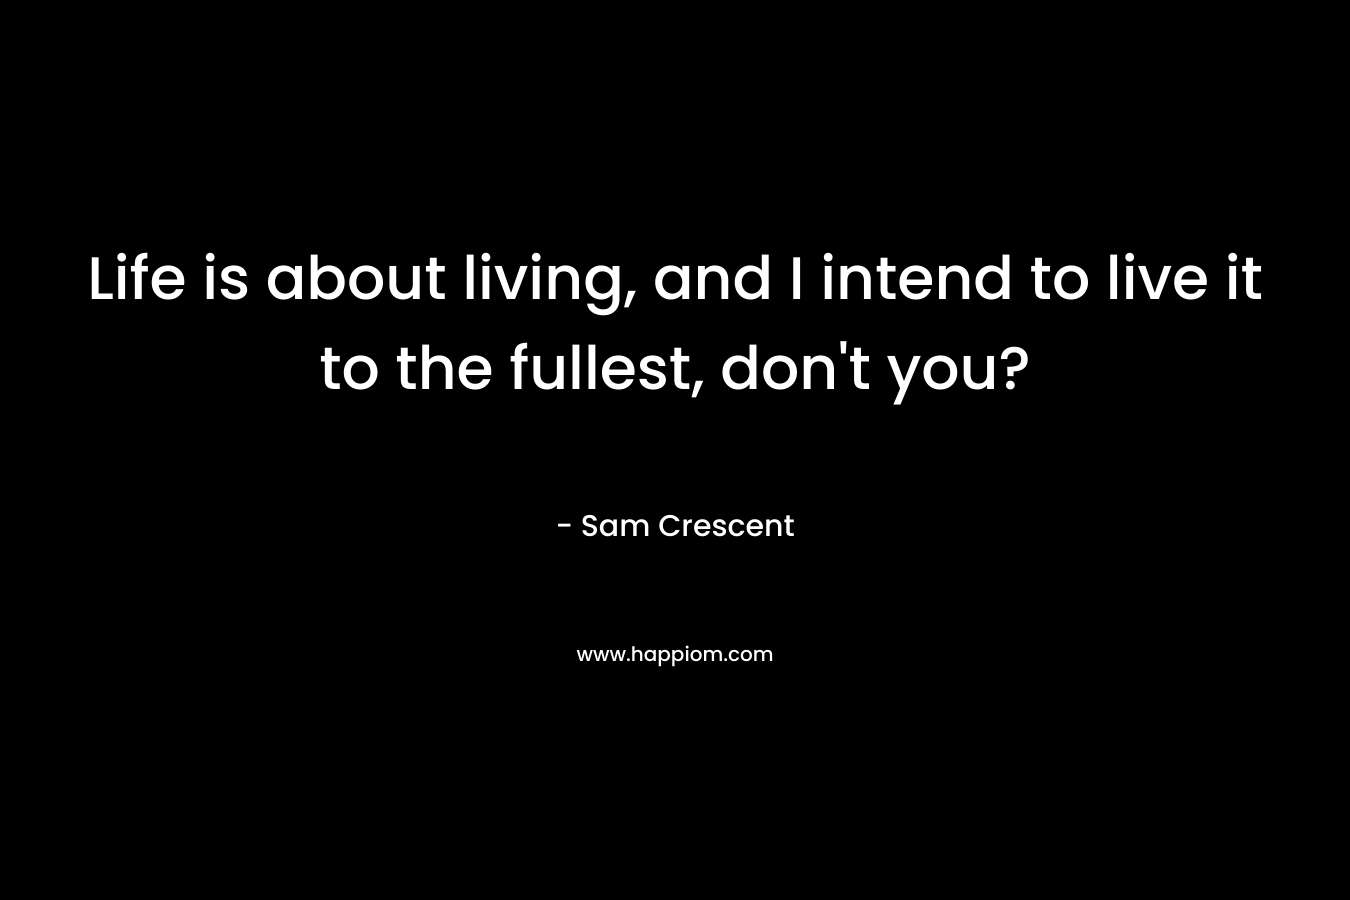 Life is about living, and I intend to live it to the fullest, don’t you? – Sam Crescent